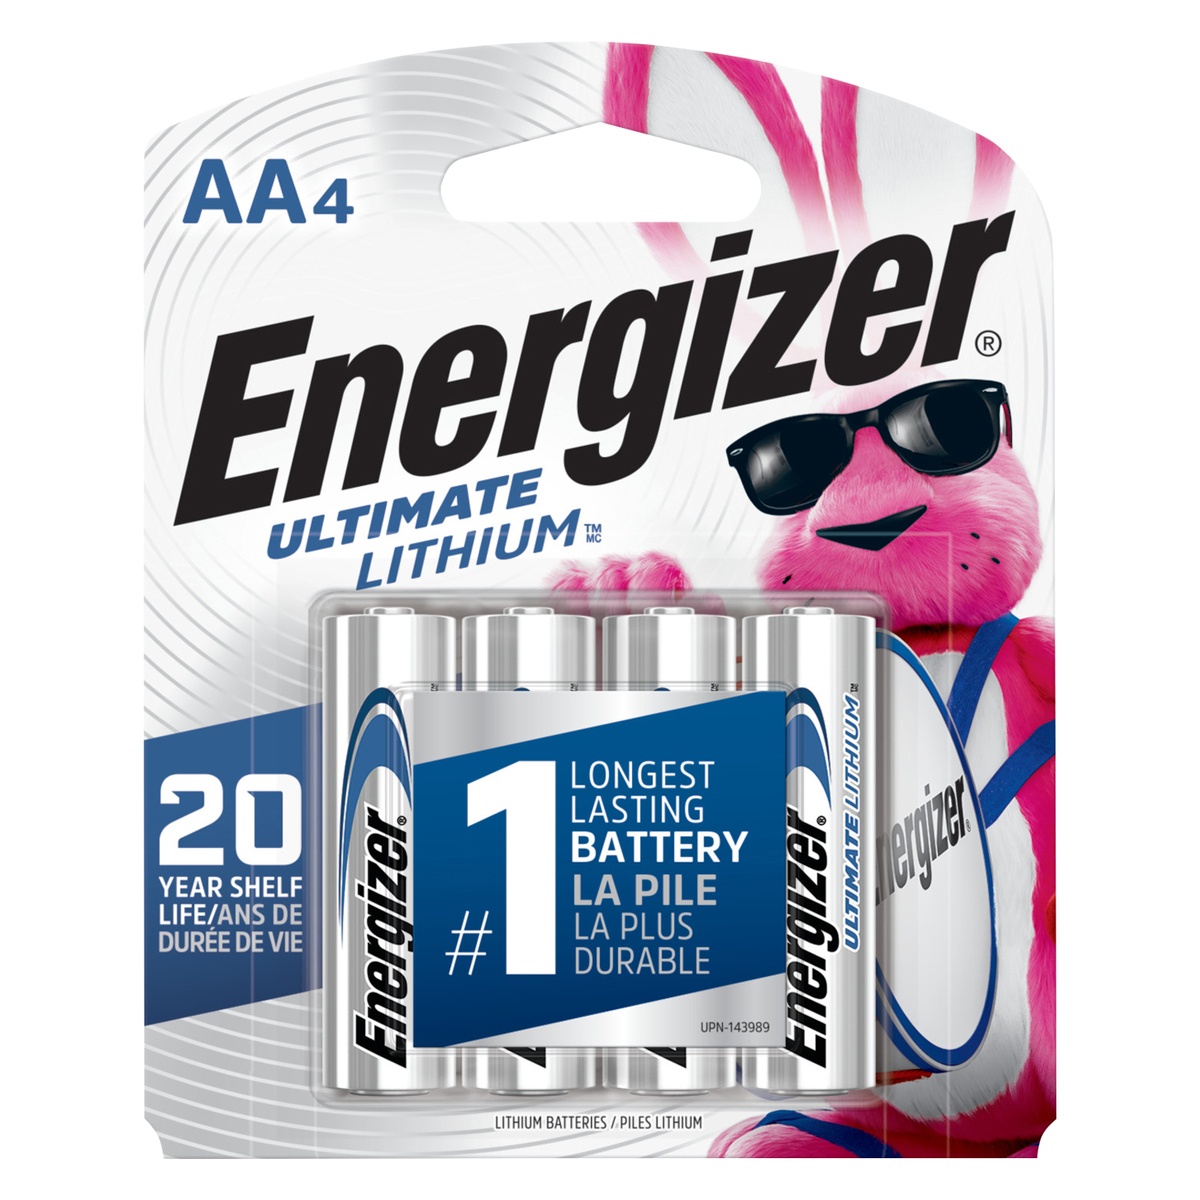 slide 1 of 6, Energizer Ultimate Lithium AA Batteries, 4 ct